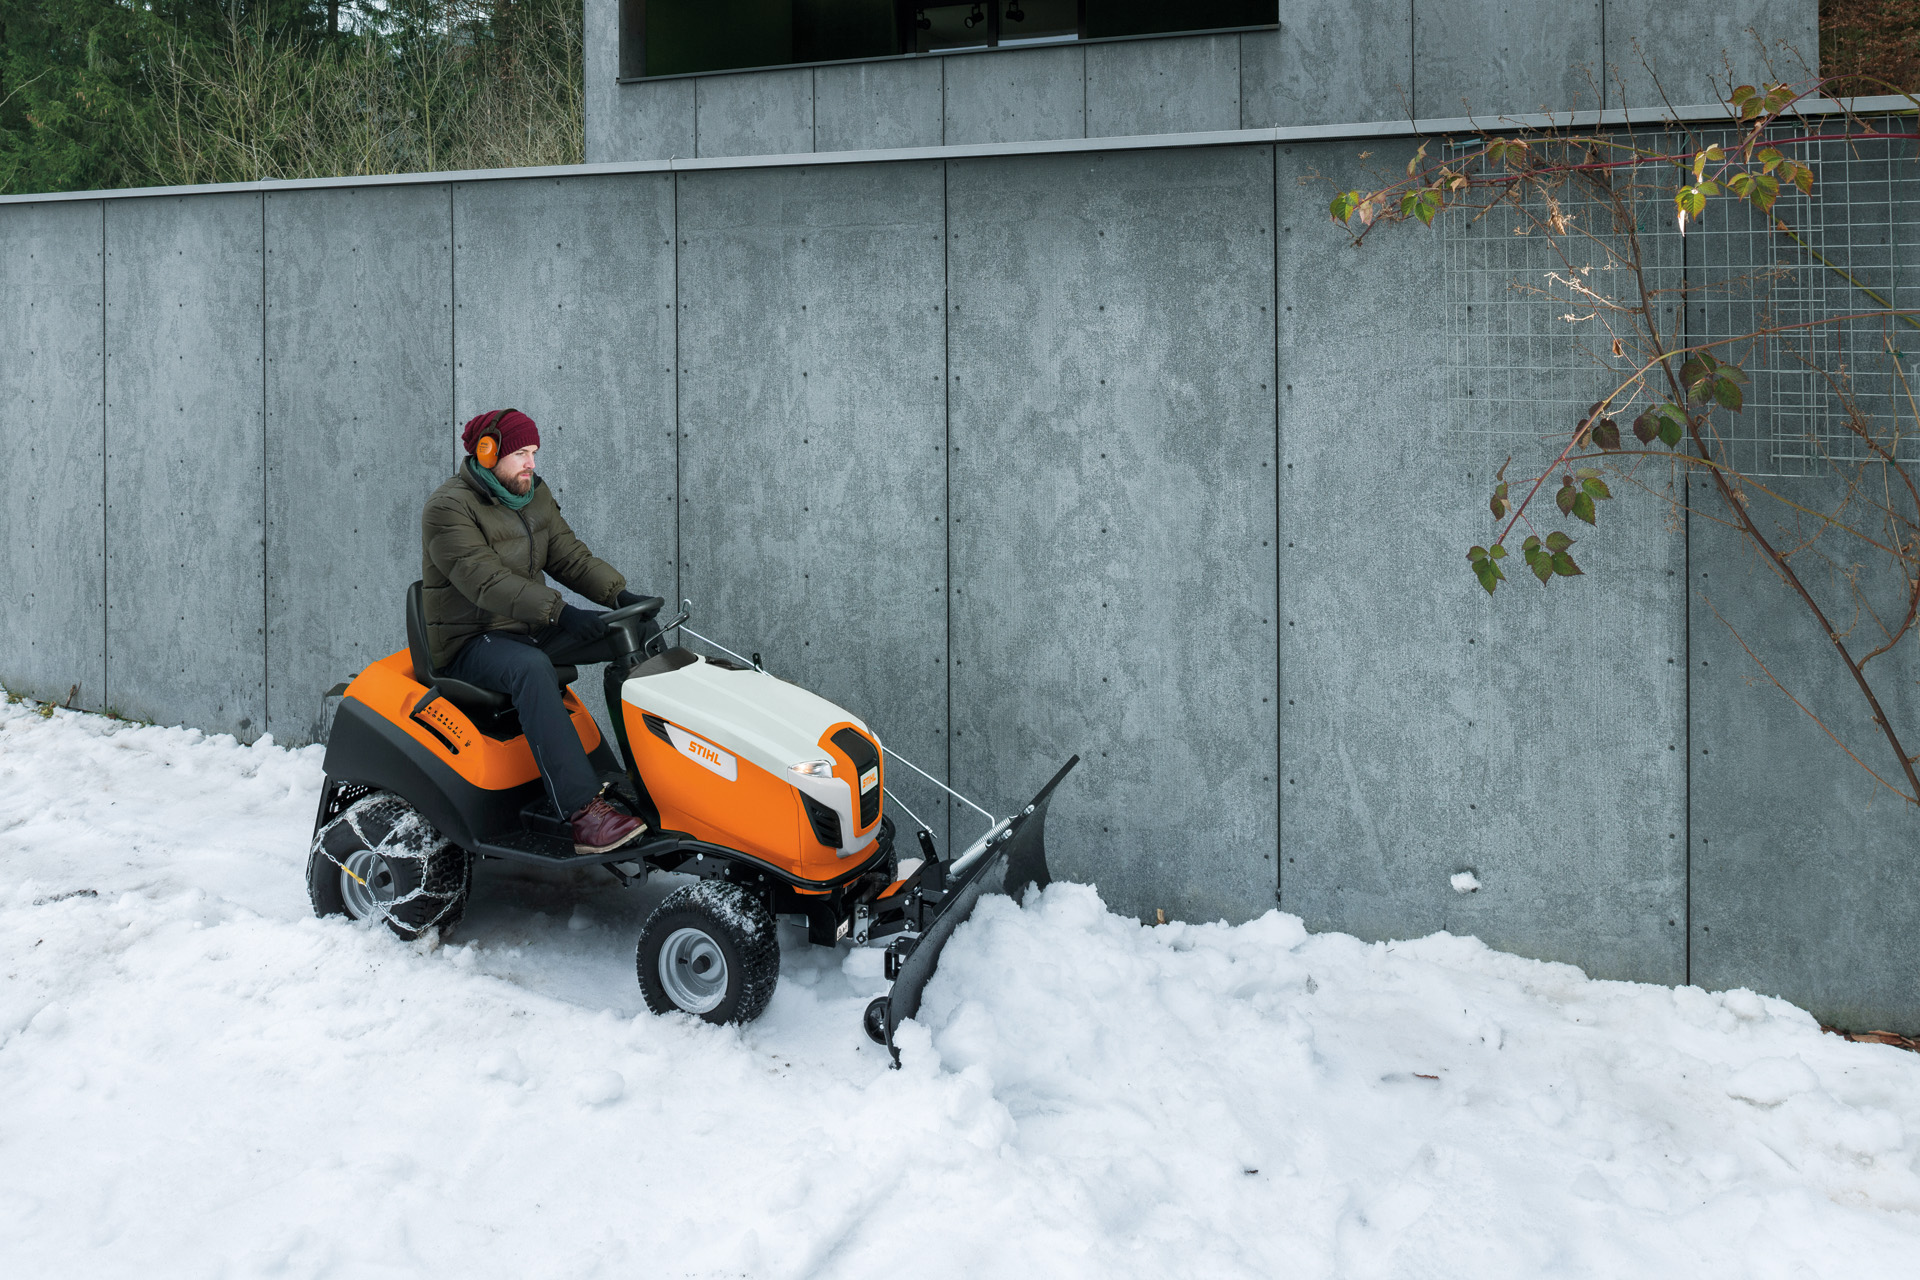 Man clears snow in front of a wall on a snow plough ride-on mower